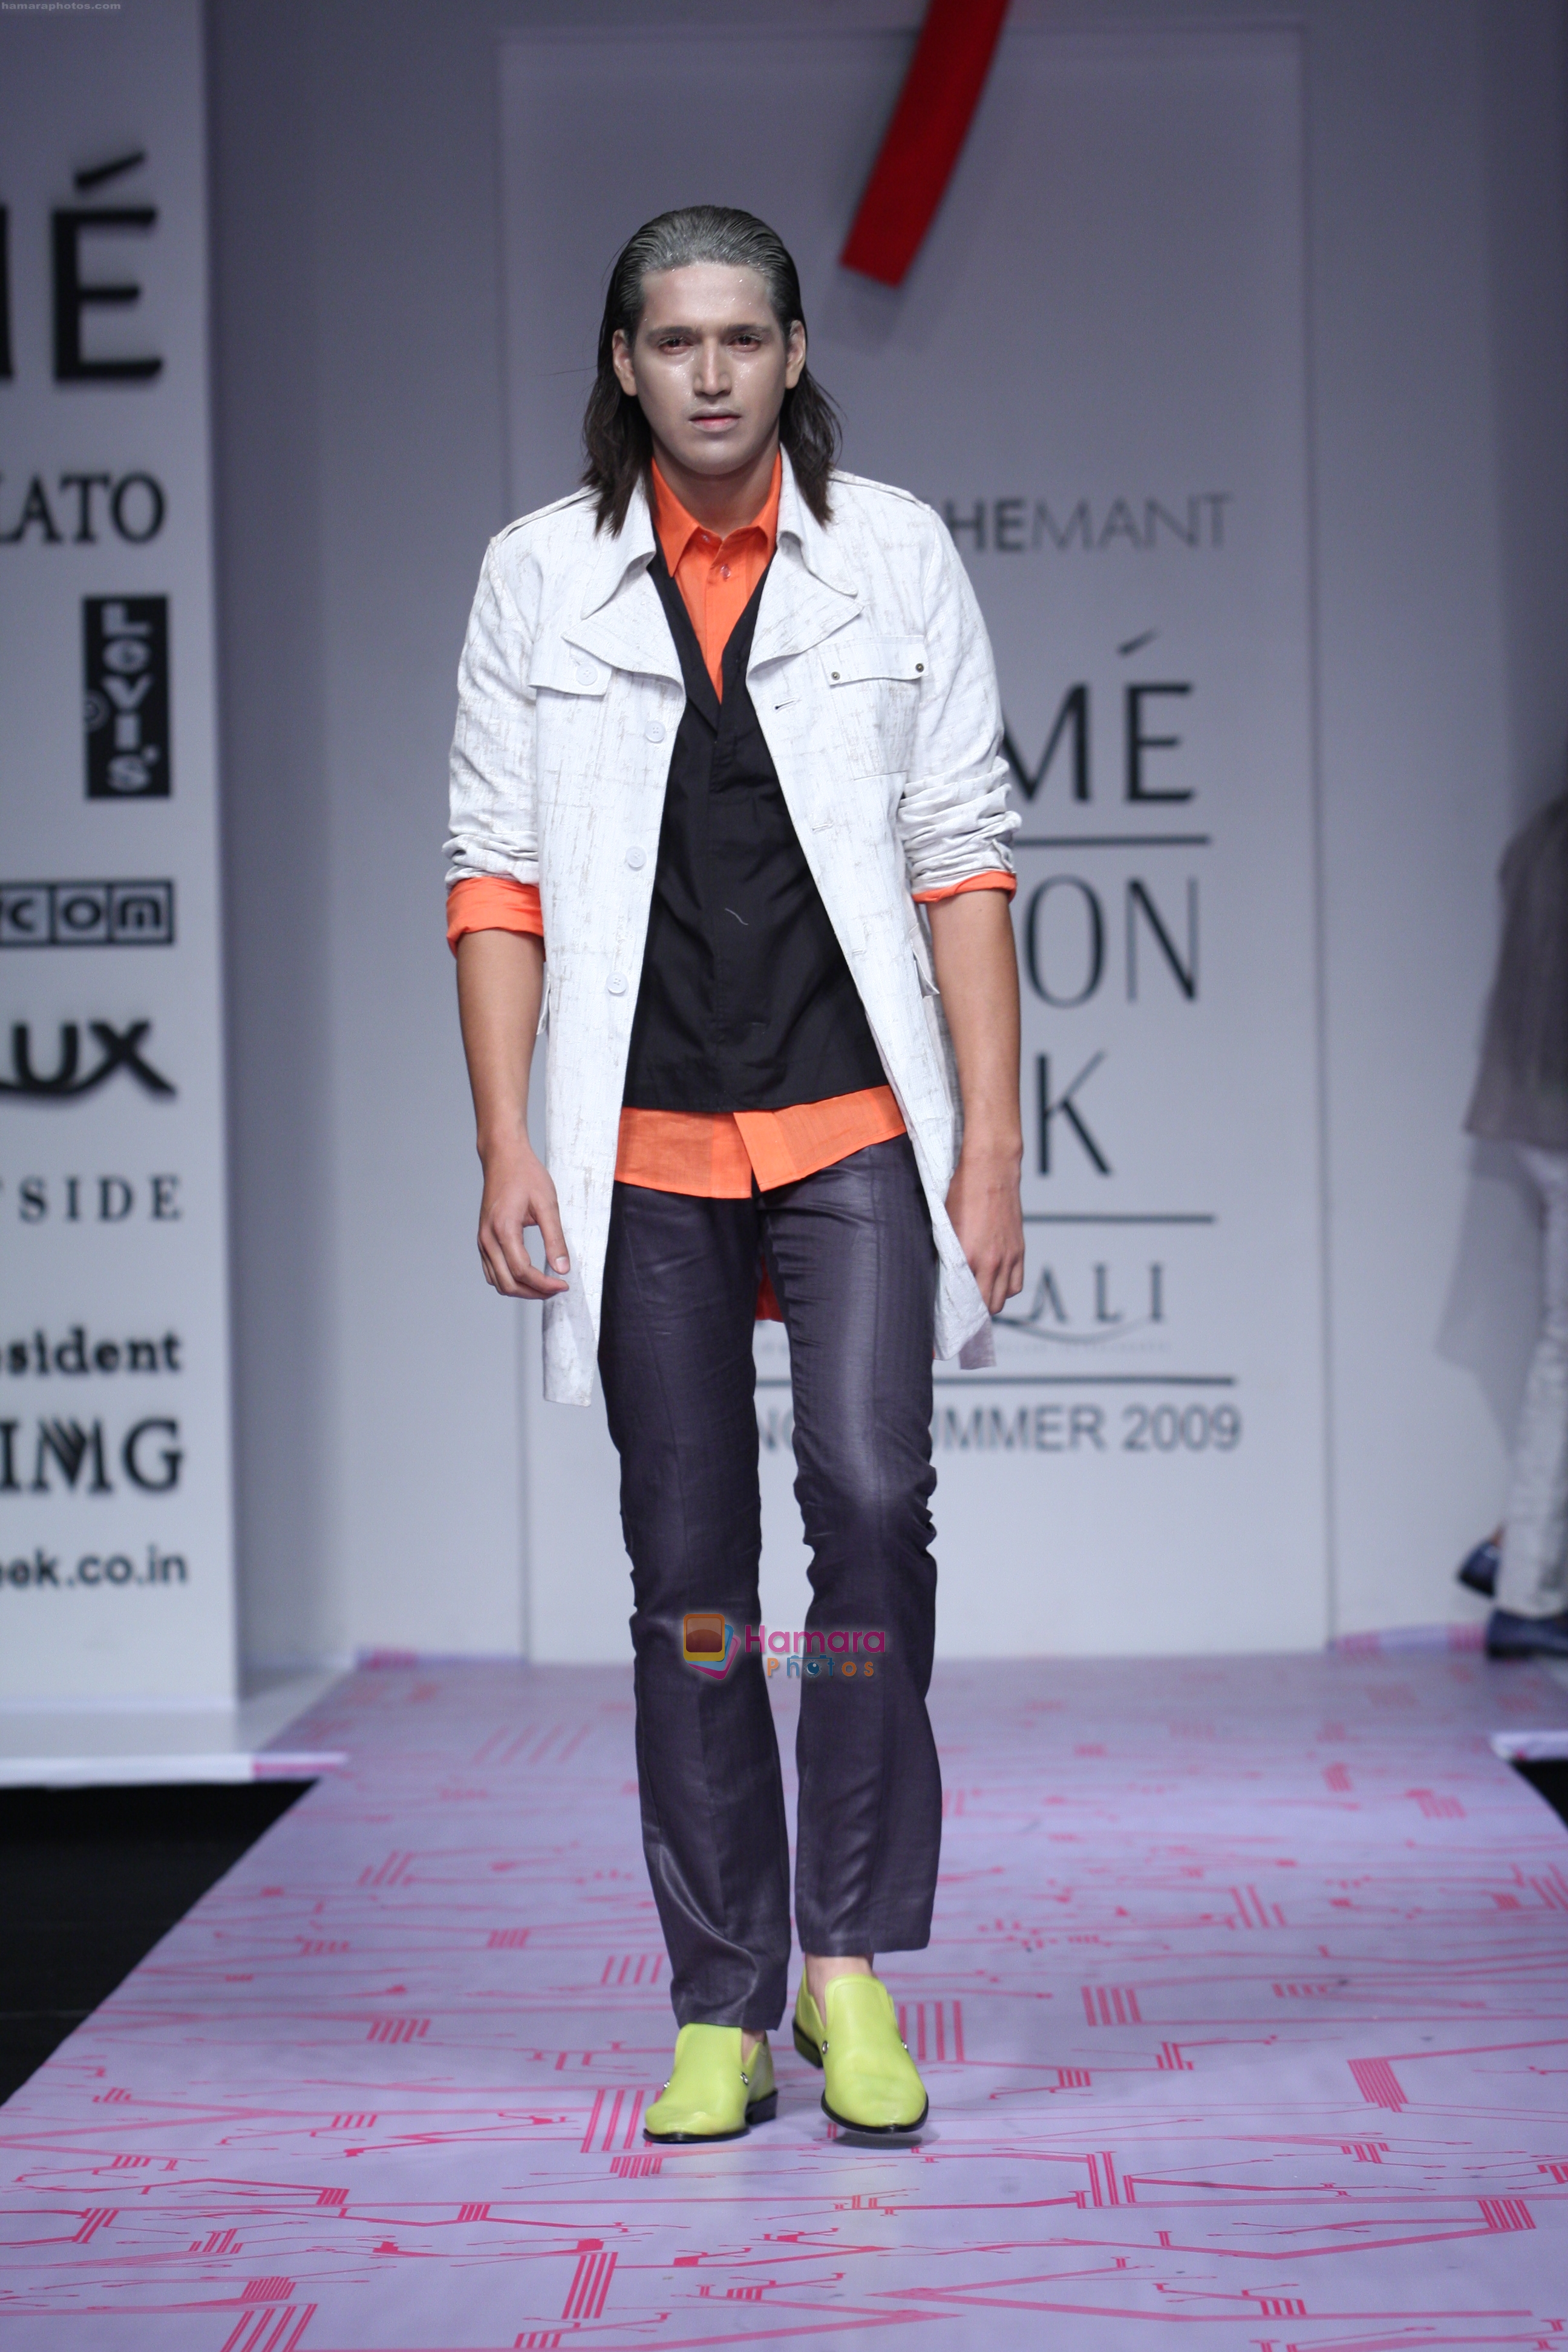 Model walk the ramp for Leconet Hemant's Show at Lakme Fashion Week 2008 on 22nd October 2008 